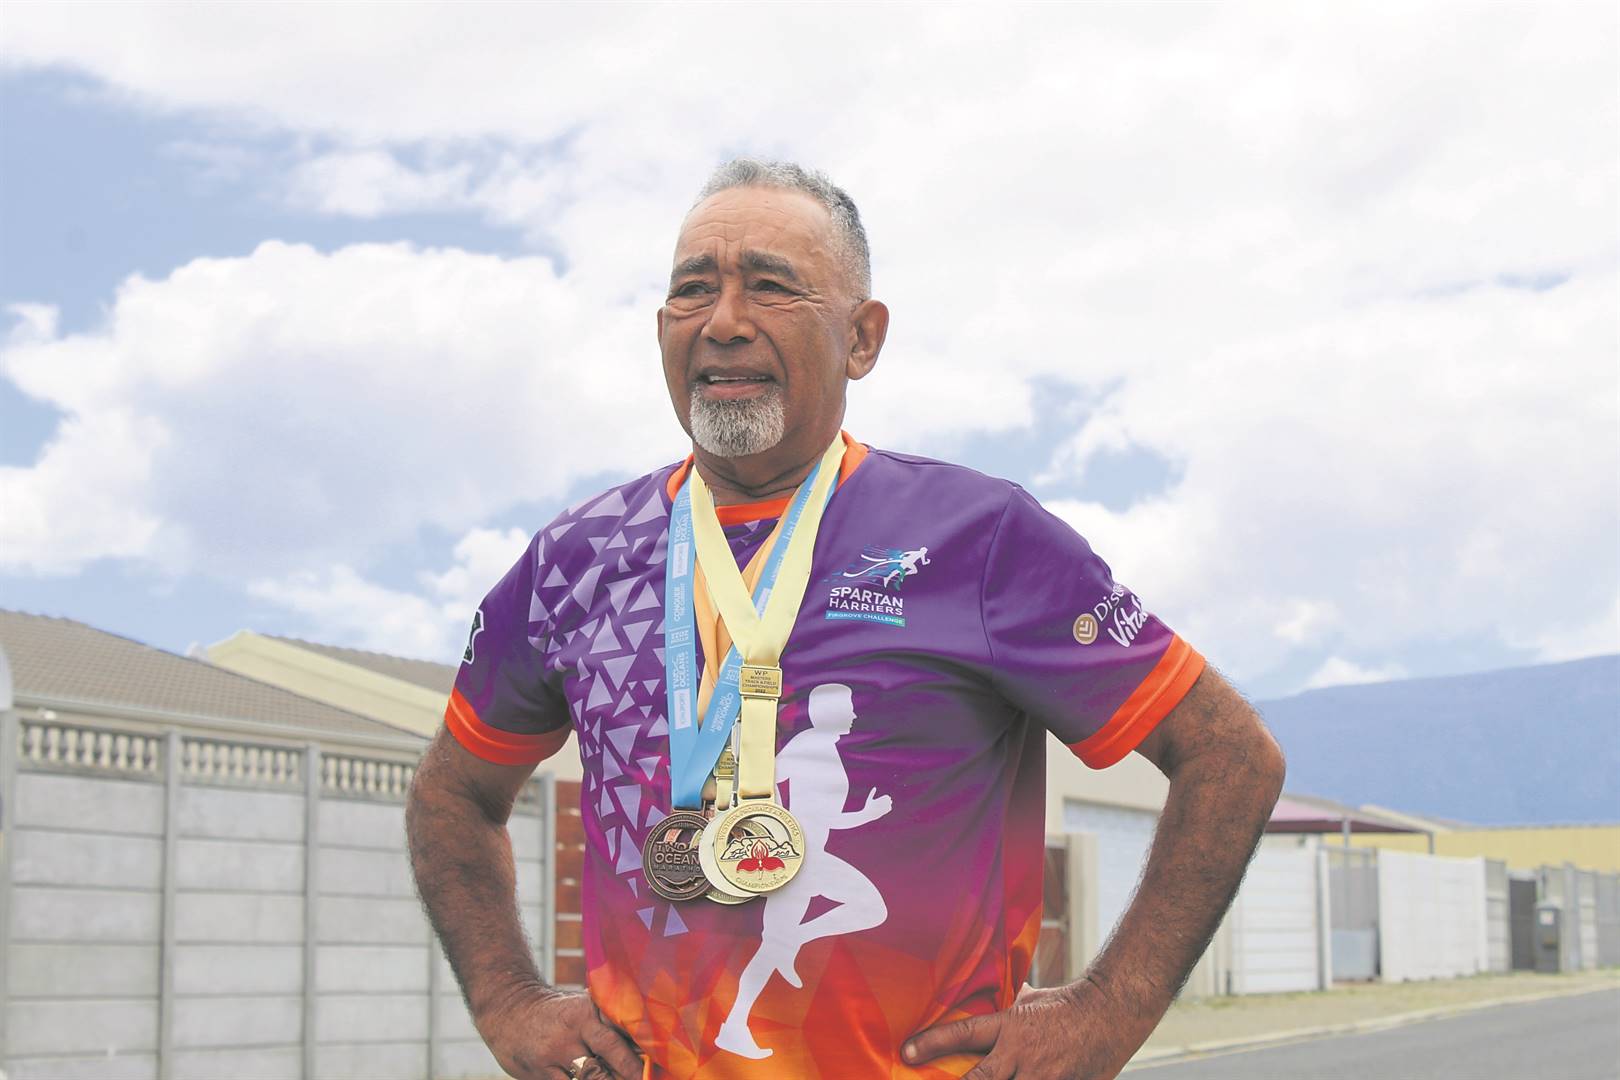 Seventy-four-year-old Patrick Dreyer is set to compete in the African Masters Athletics (Afma) Regional Championships to be held in Pretoria in November.PHOTO: Heleen Rossouw